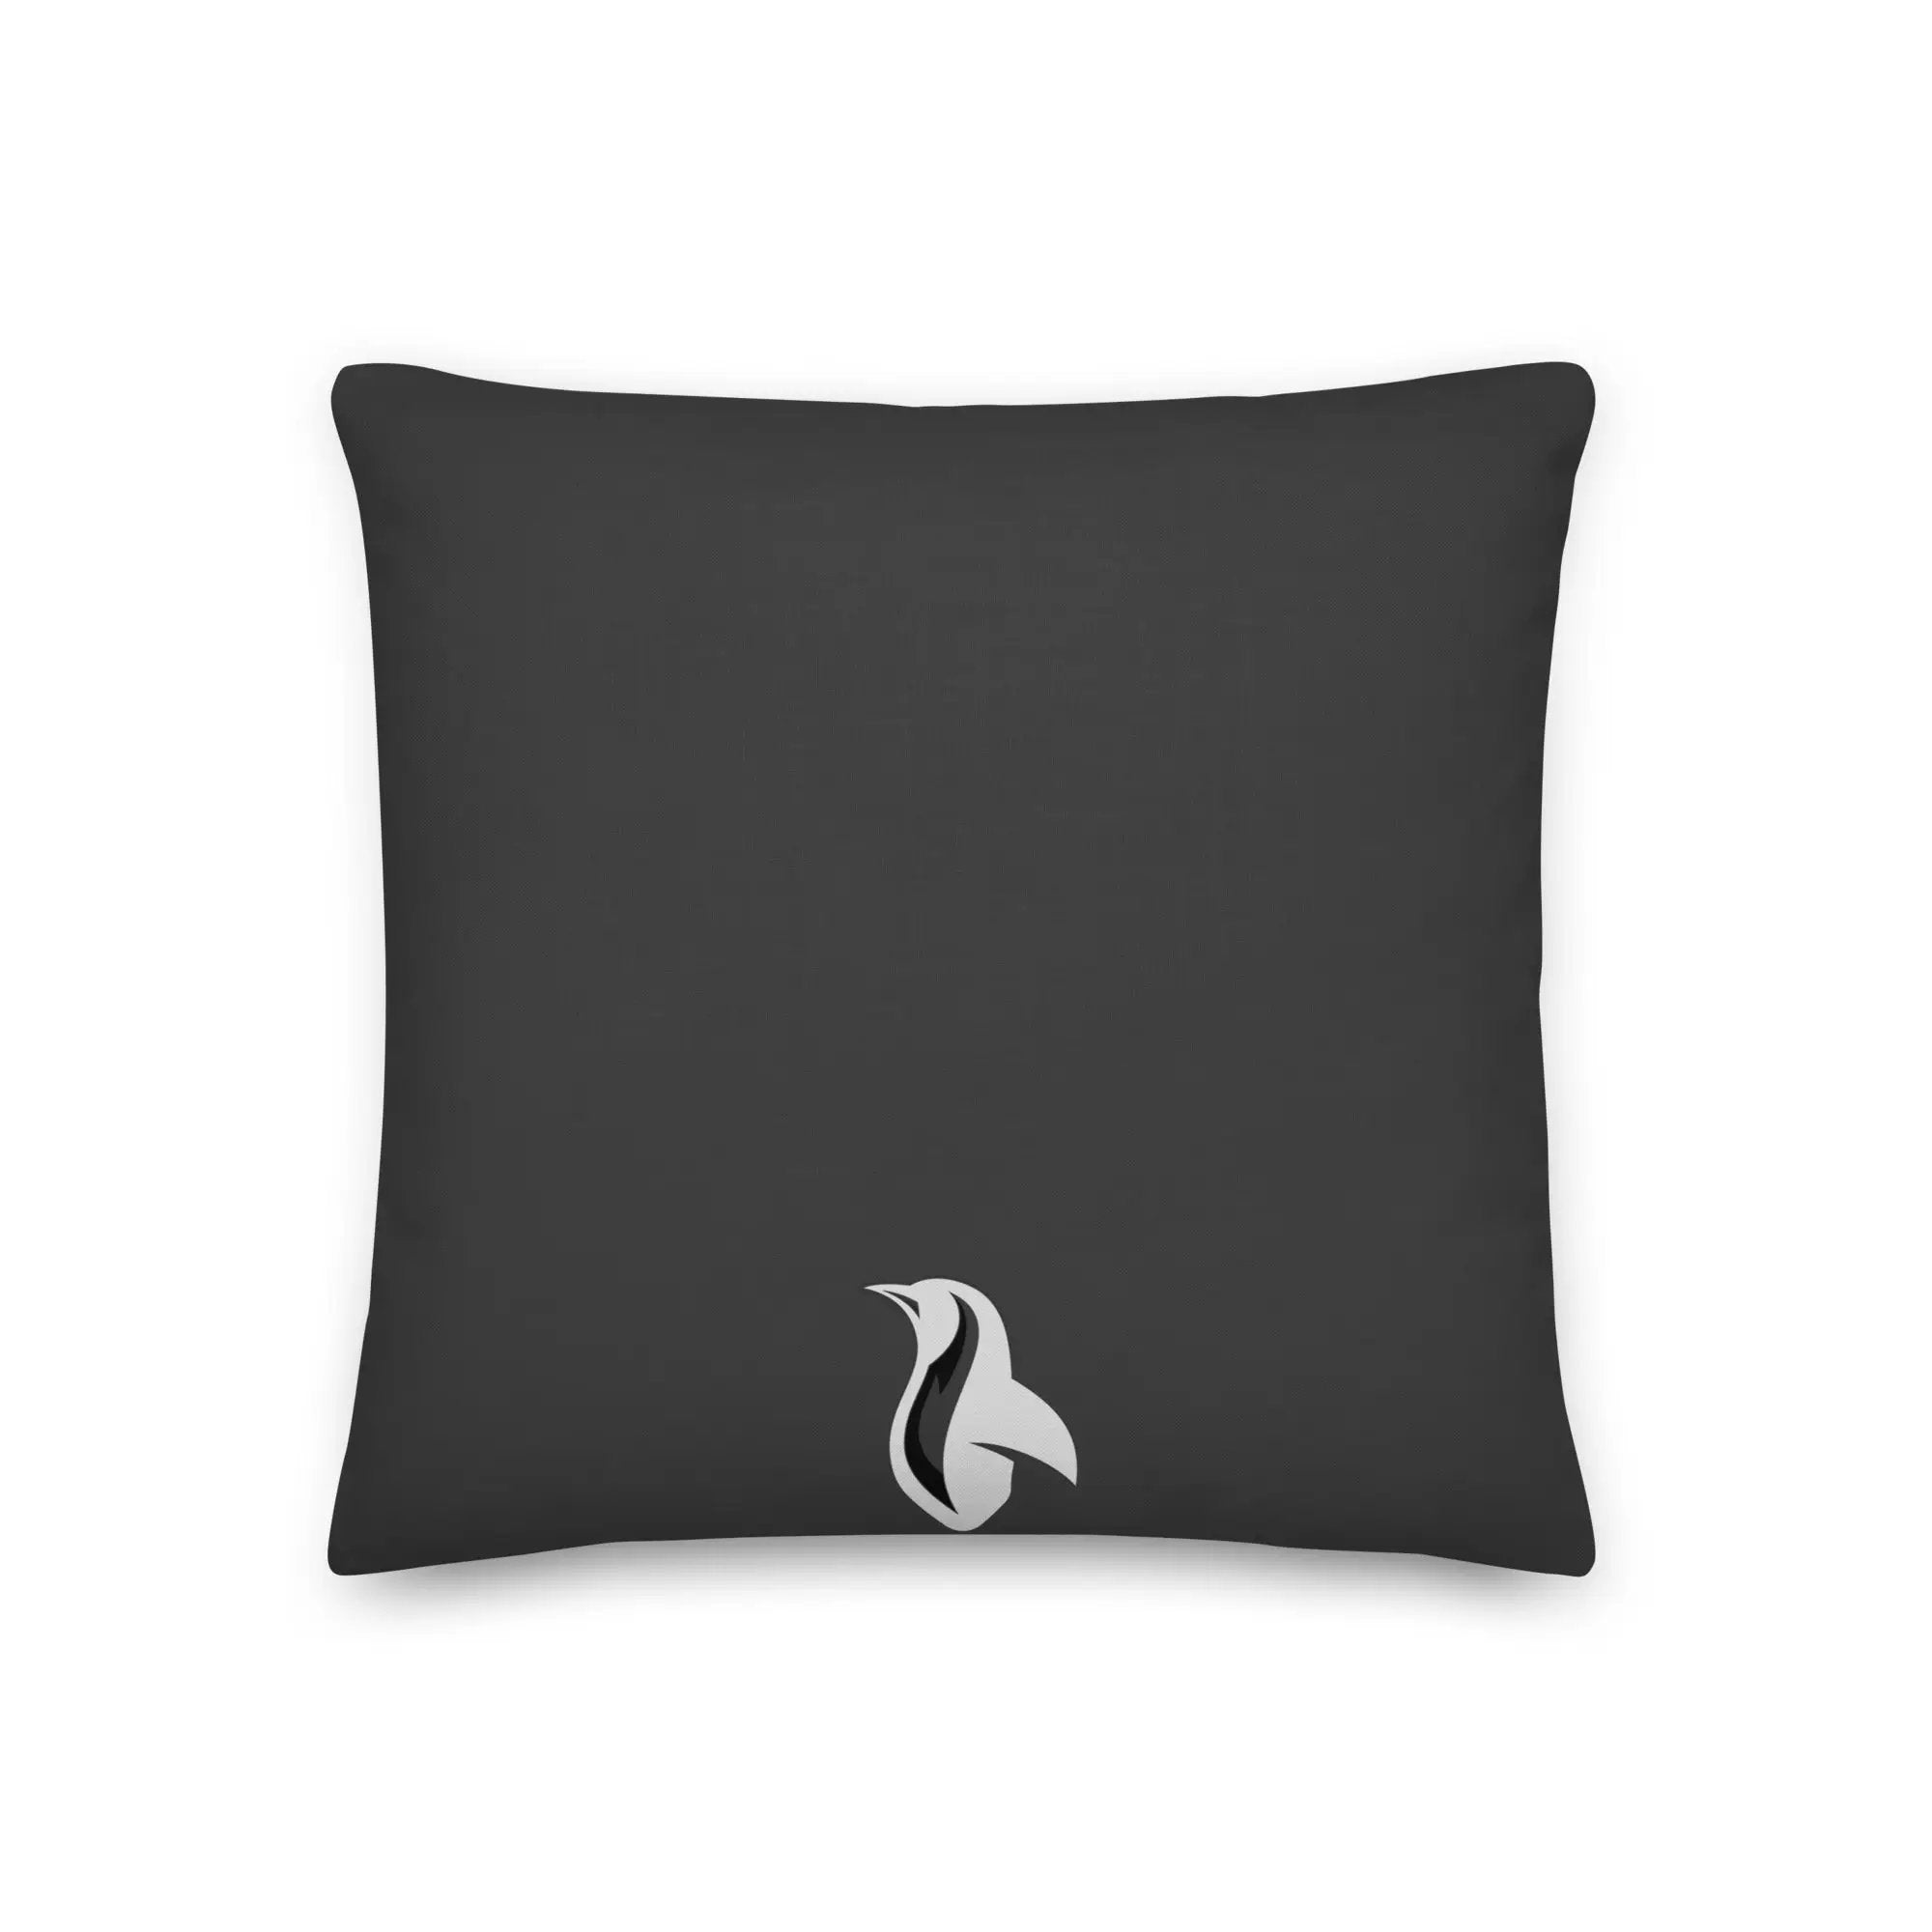 Black pillow with Fuzzy Bunnies